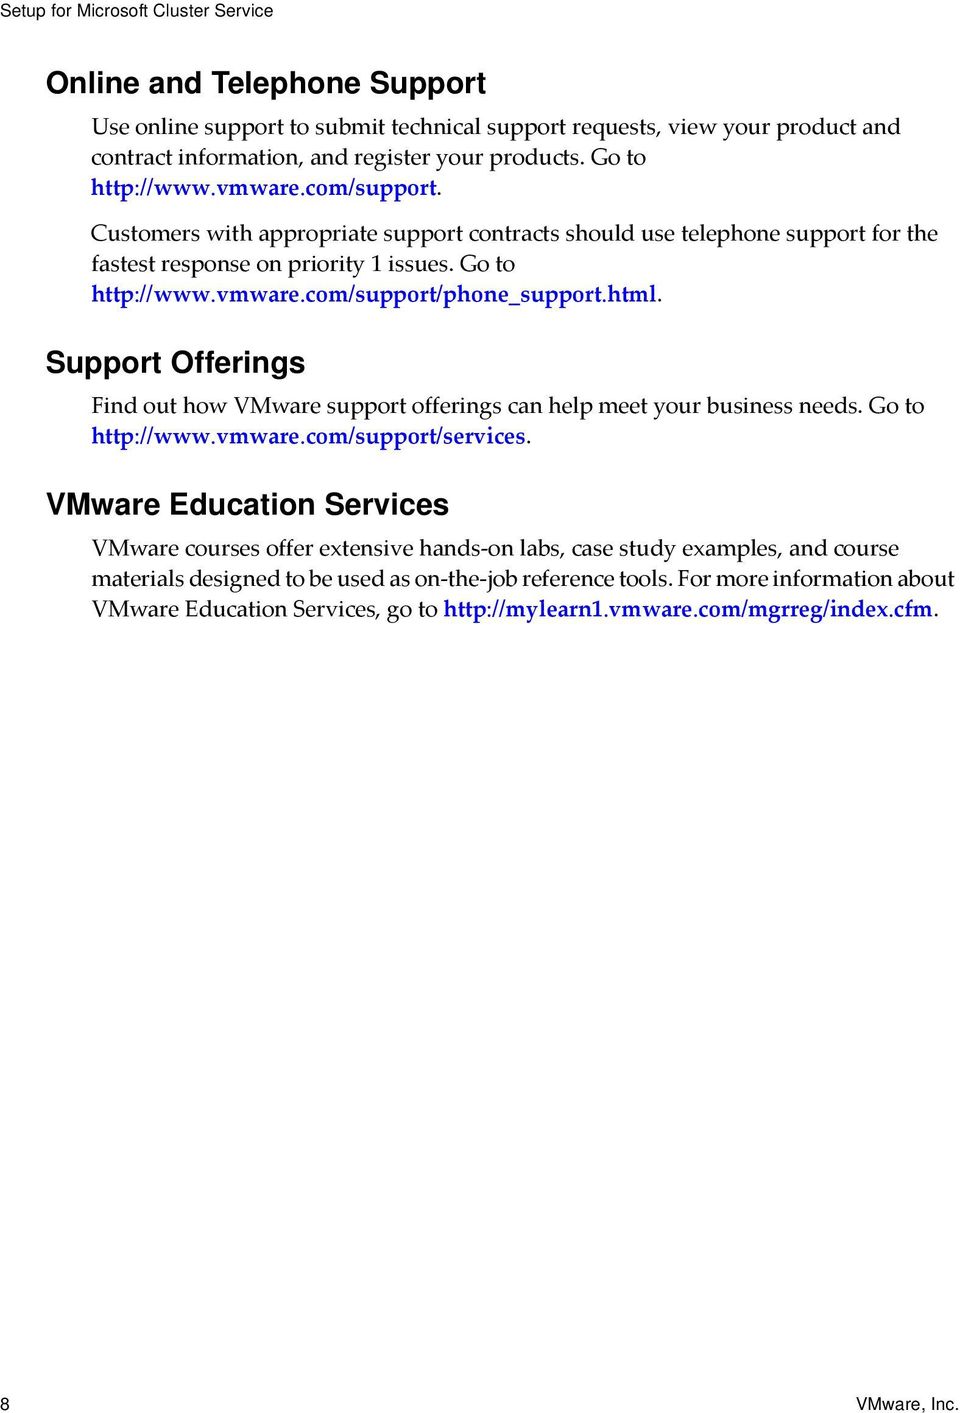 Support Offerings Find out how VMware support offerings can help meet your business needs. Go to http://www.vmware.com/support/services.